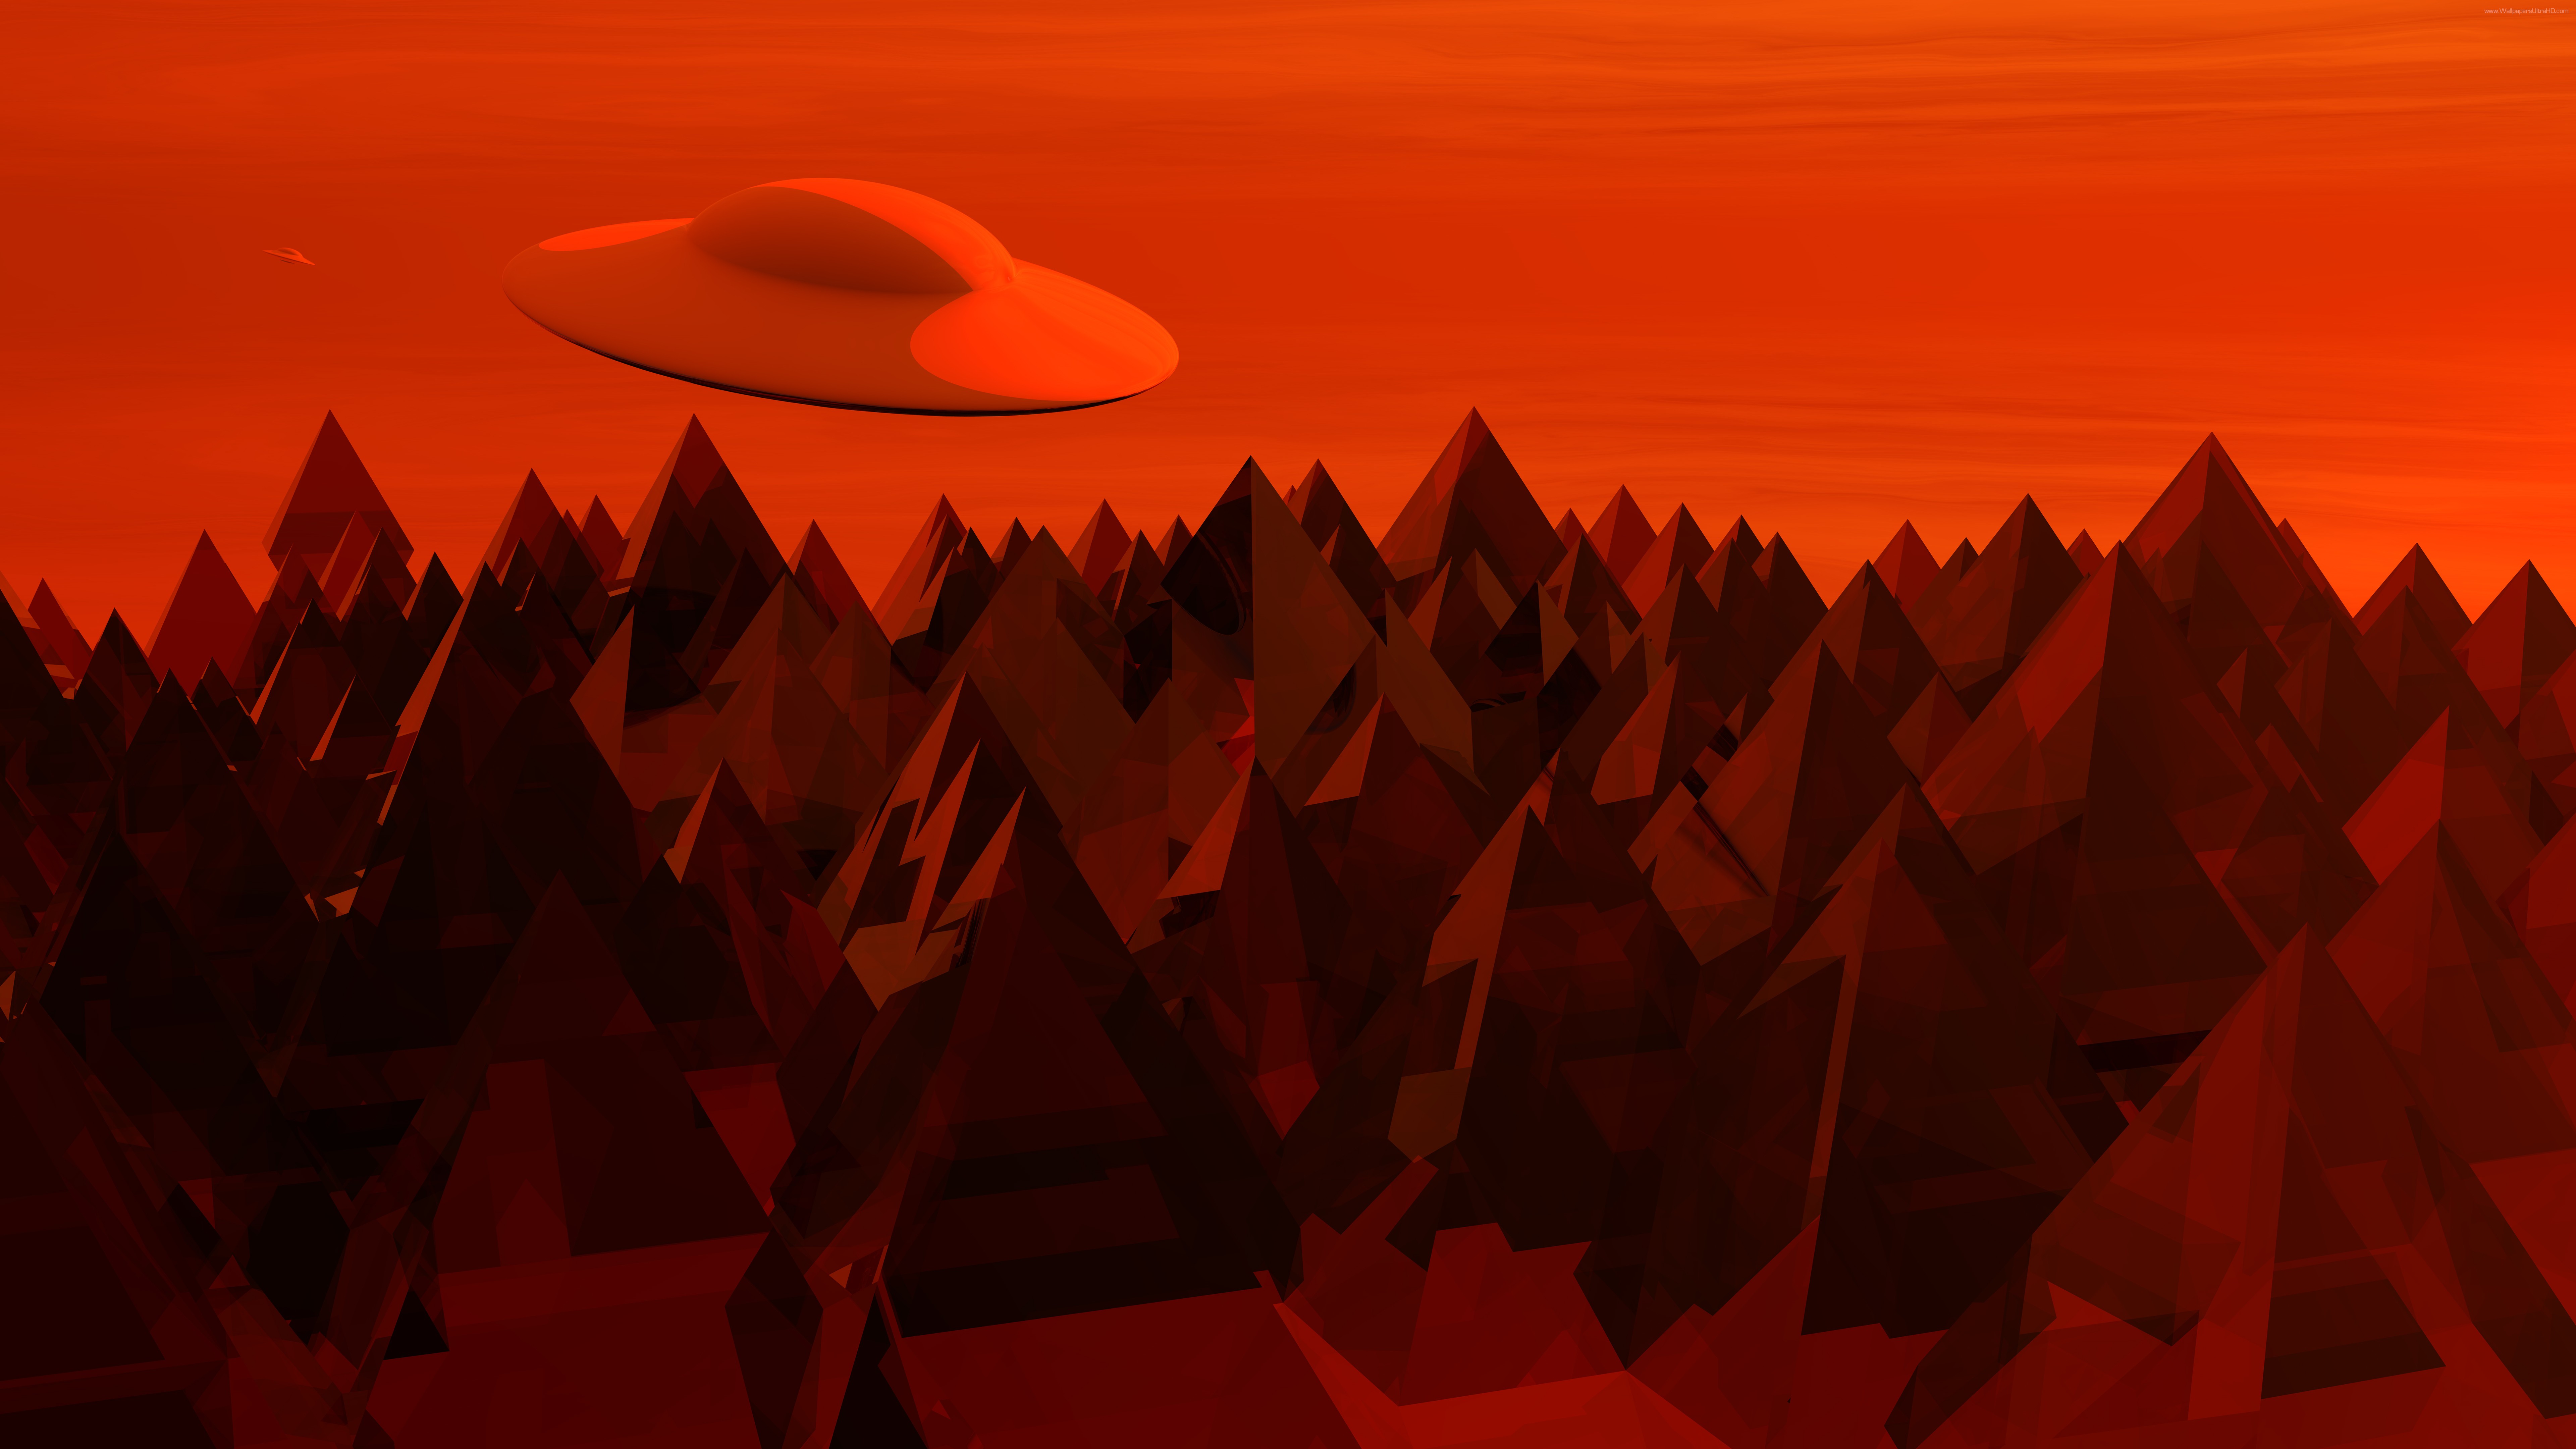 General 7680x4320 flying saucers mountains red sky red UFO digital art red background CGI vehicle